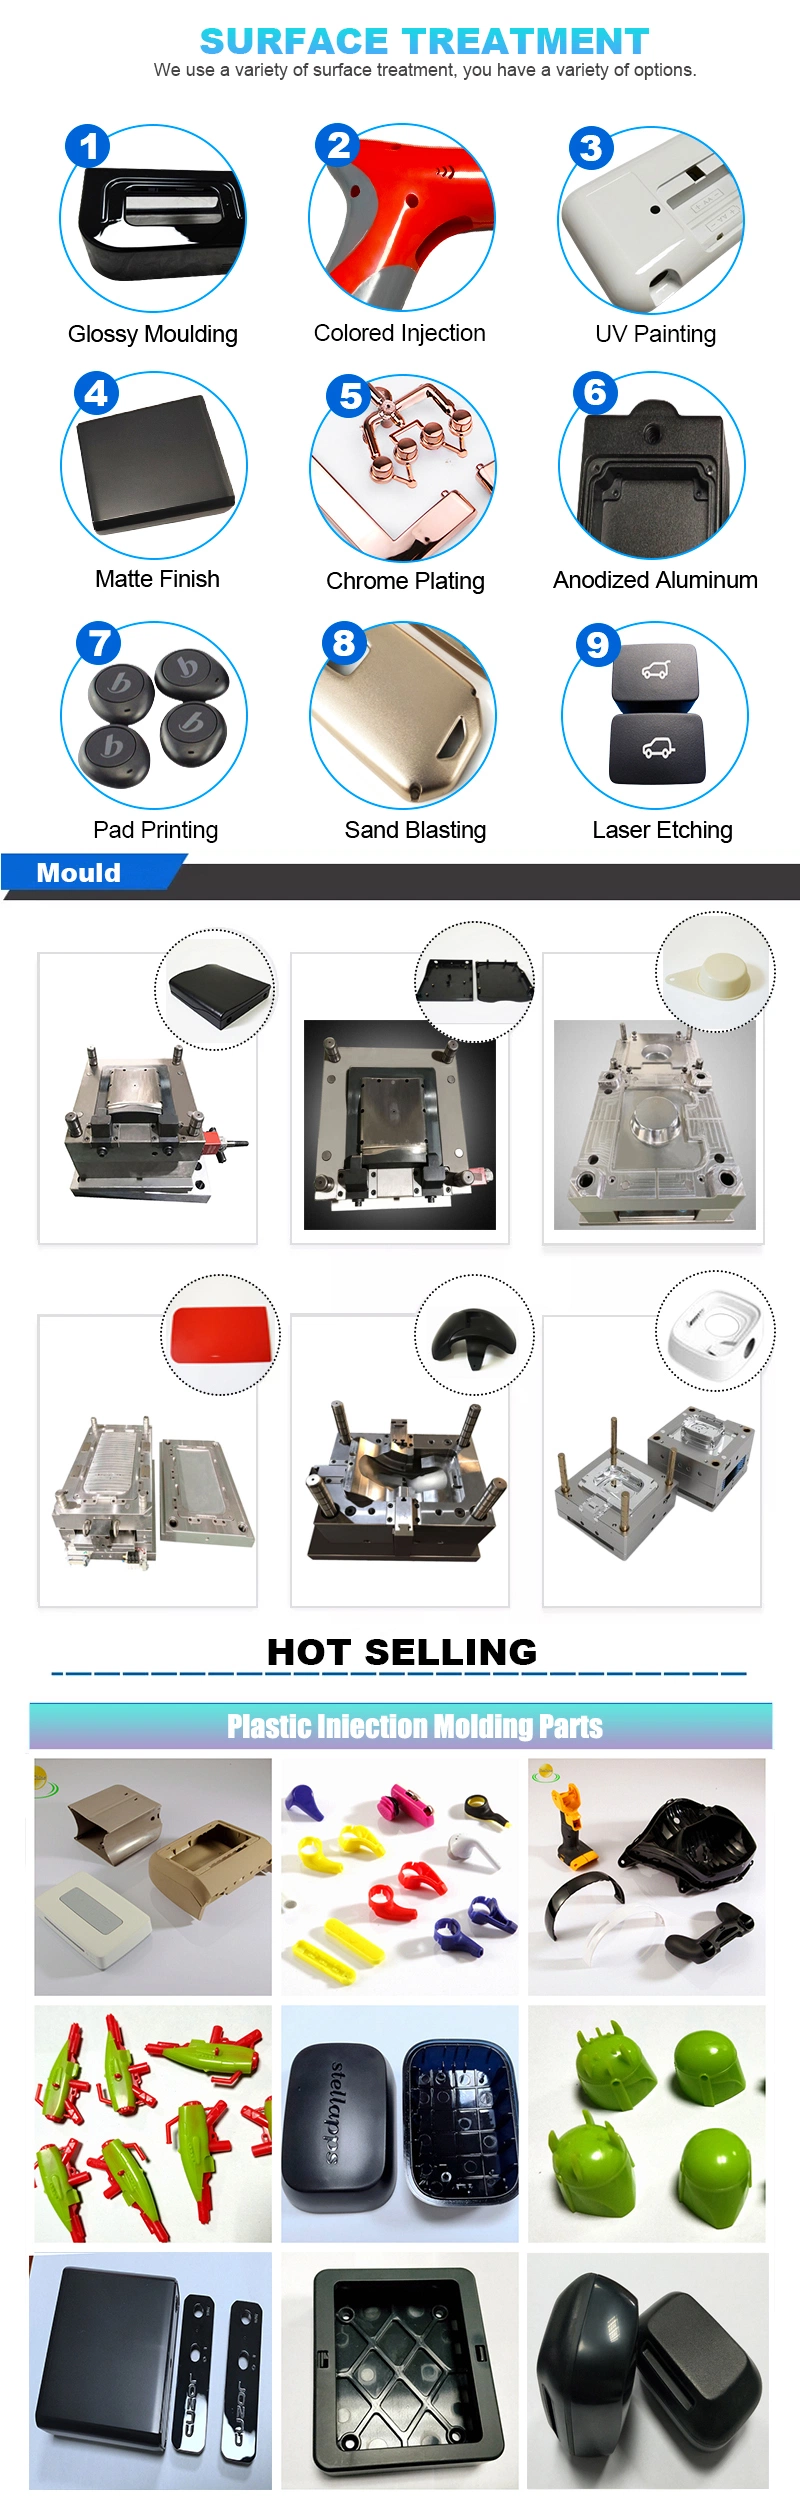 Custom Rapid Injection Molding with High Quality for Low Volumes Molding Service